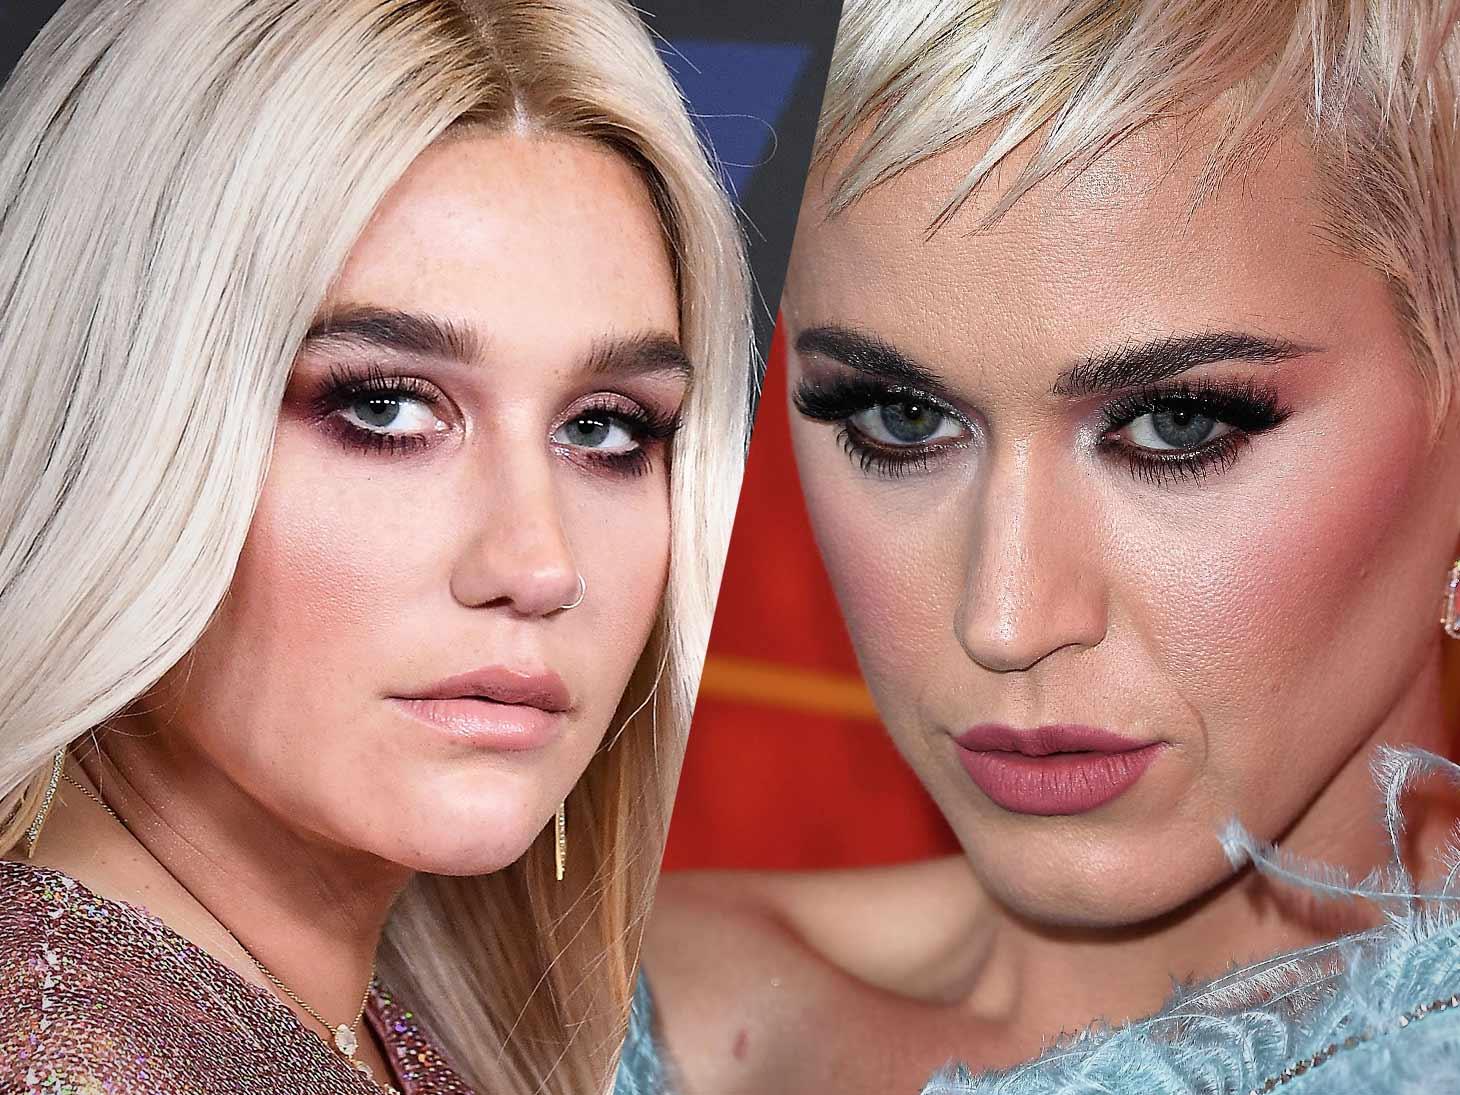 Katy Perry Feared Backlash If She Defended Dr. Luke in Kesha Battle: ‘I Would Be the One Woman That Is Against Women’